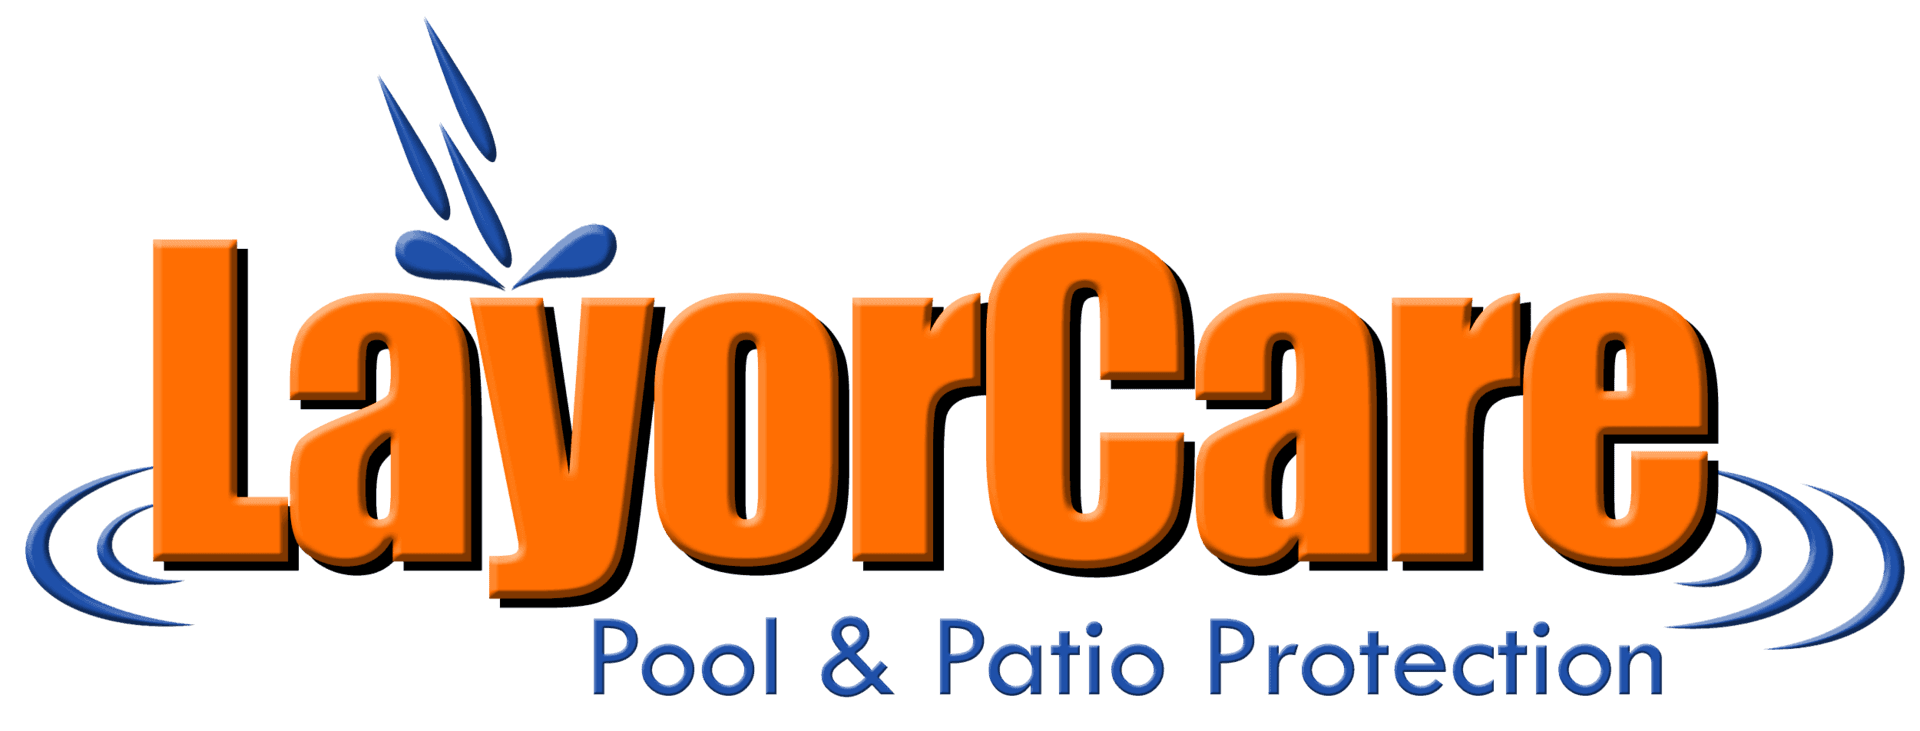 layorcare pool and patio protection